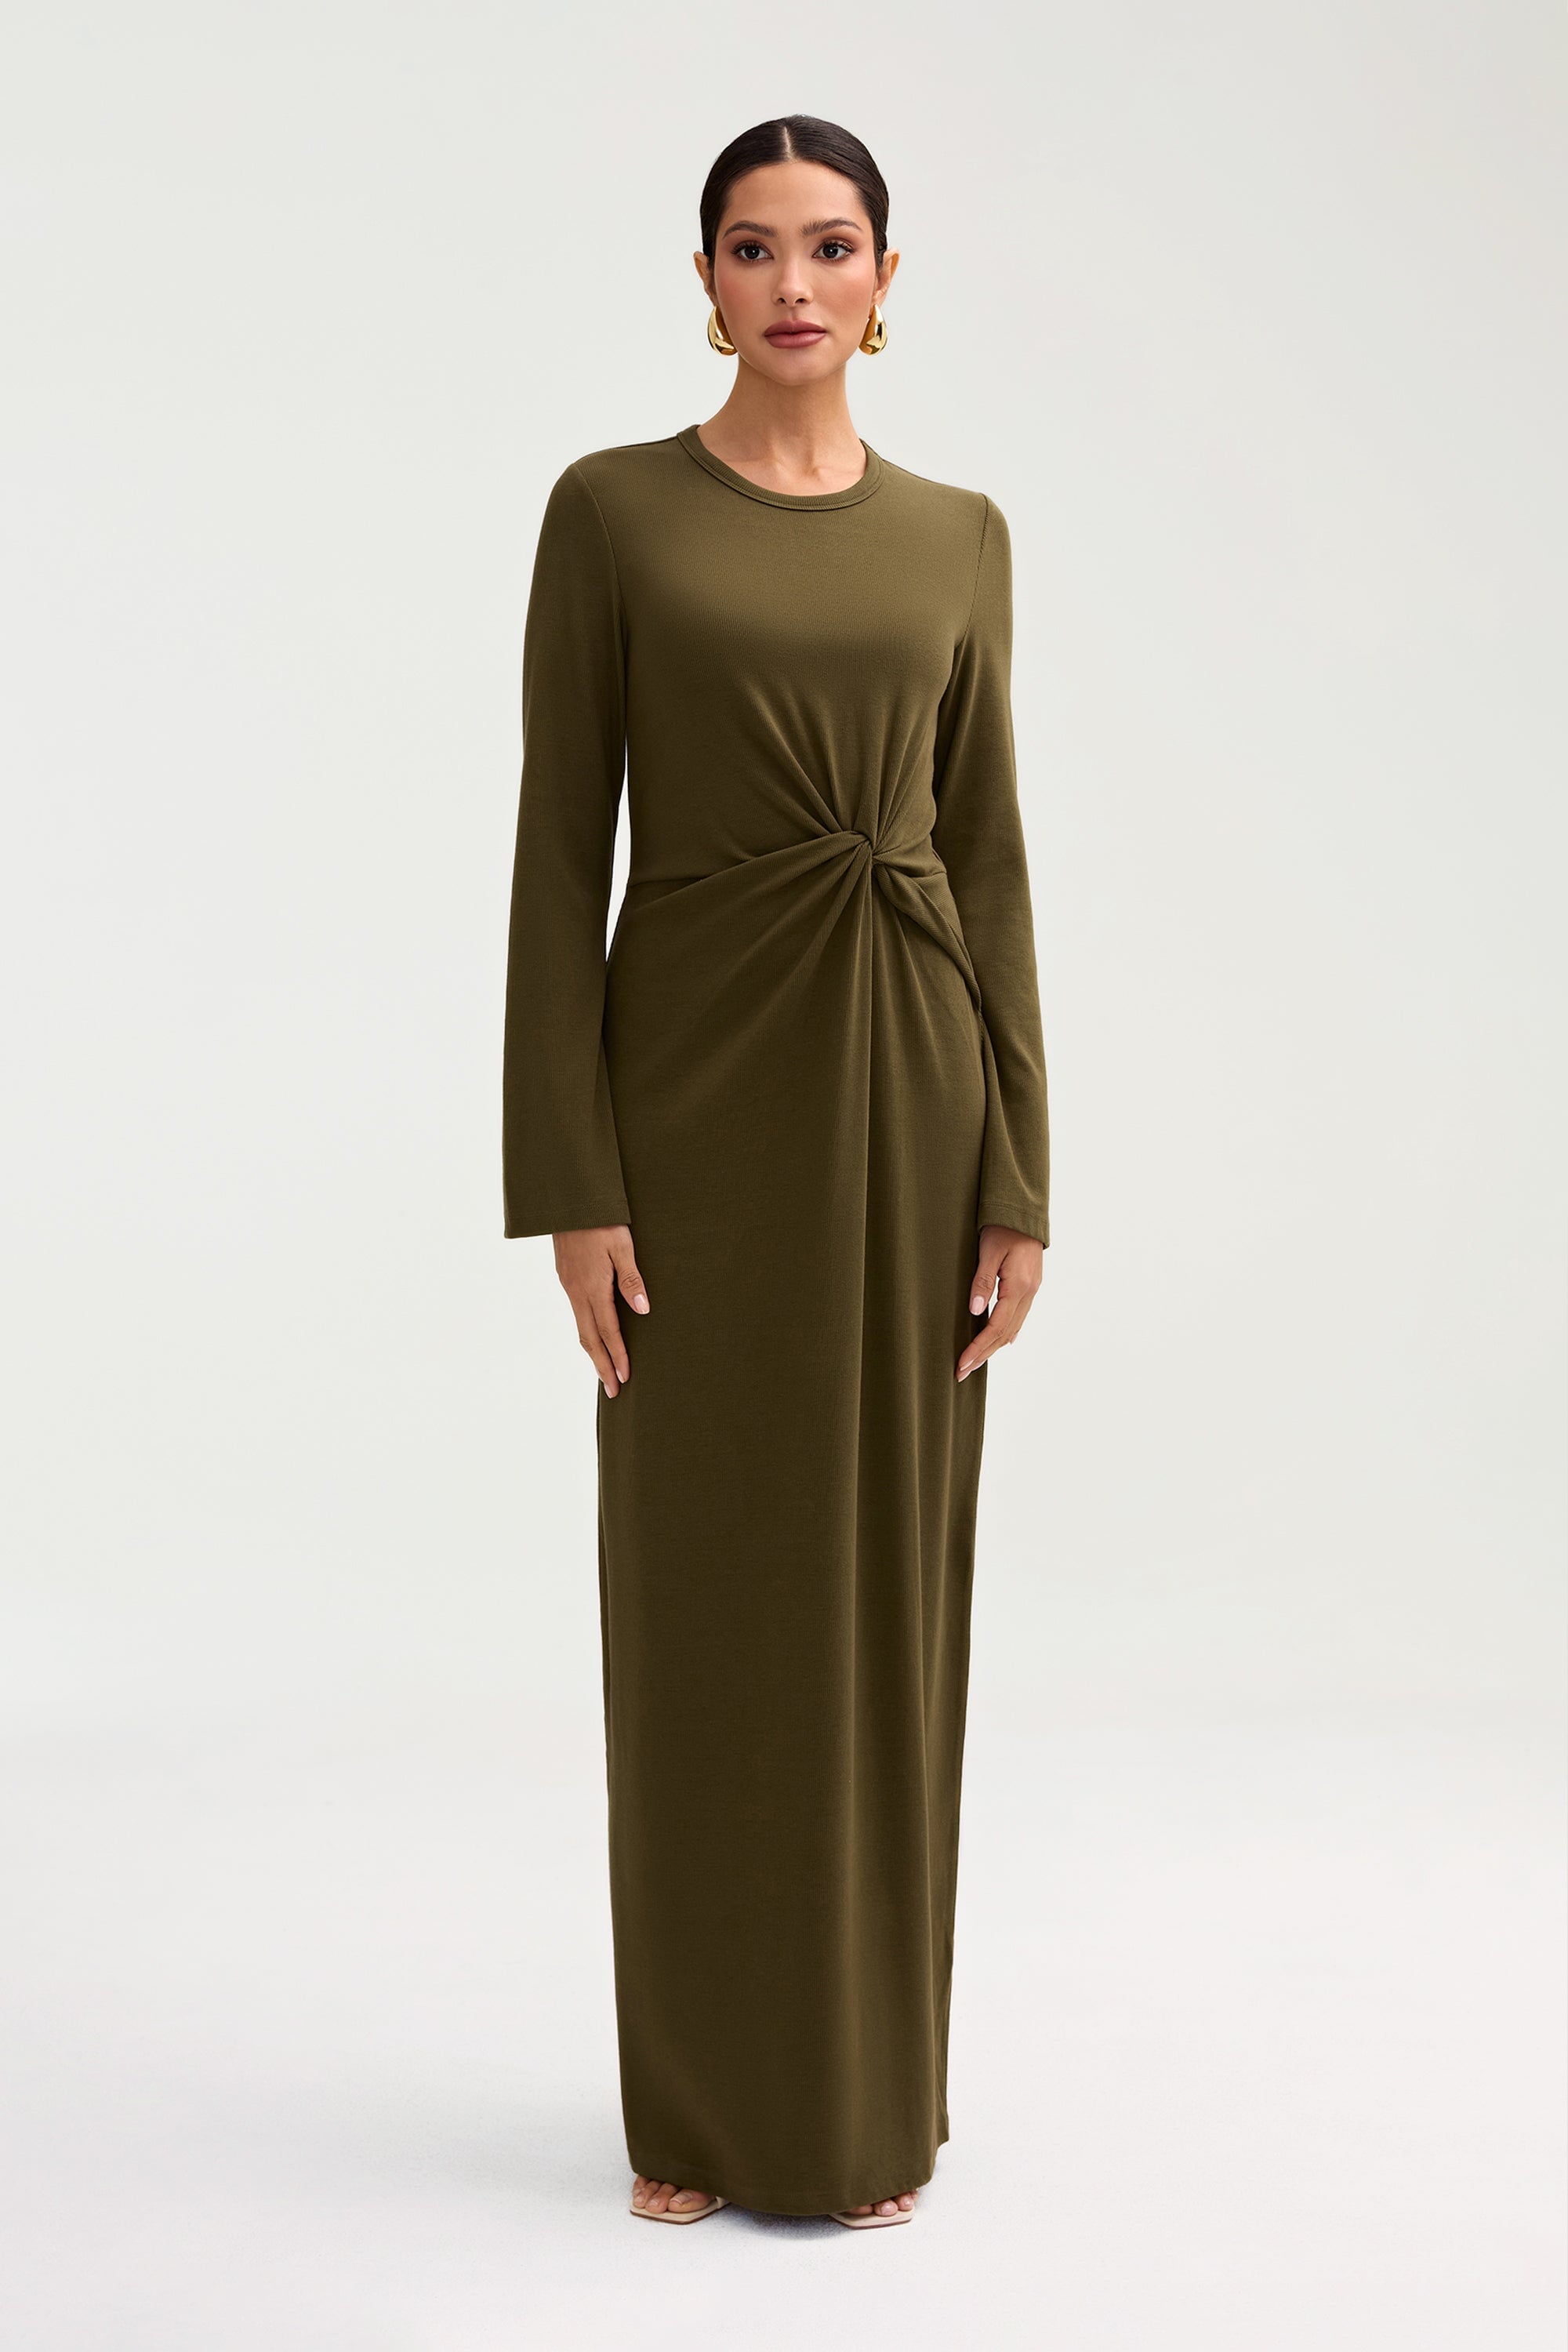 Aissia Ribbed Twist Front Maxi Dress - Olive Night Clothing Veiled 